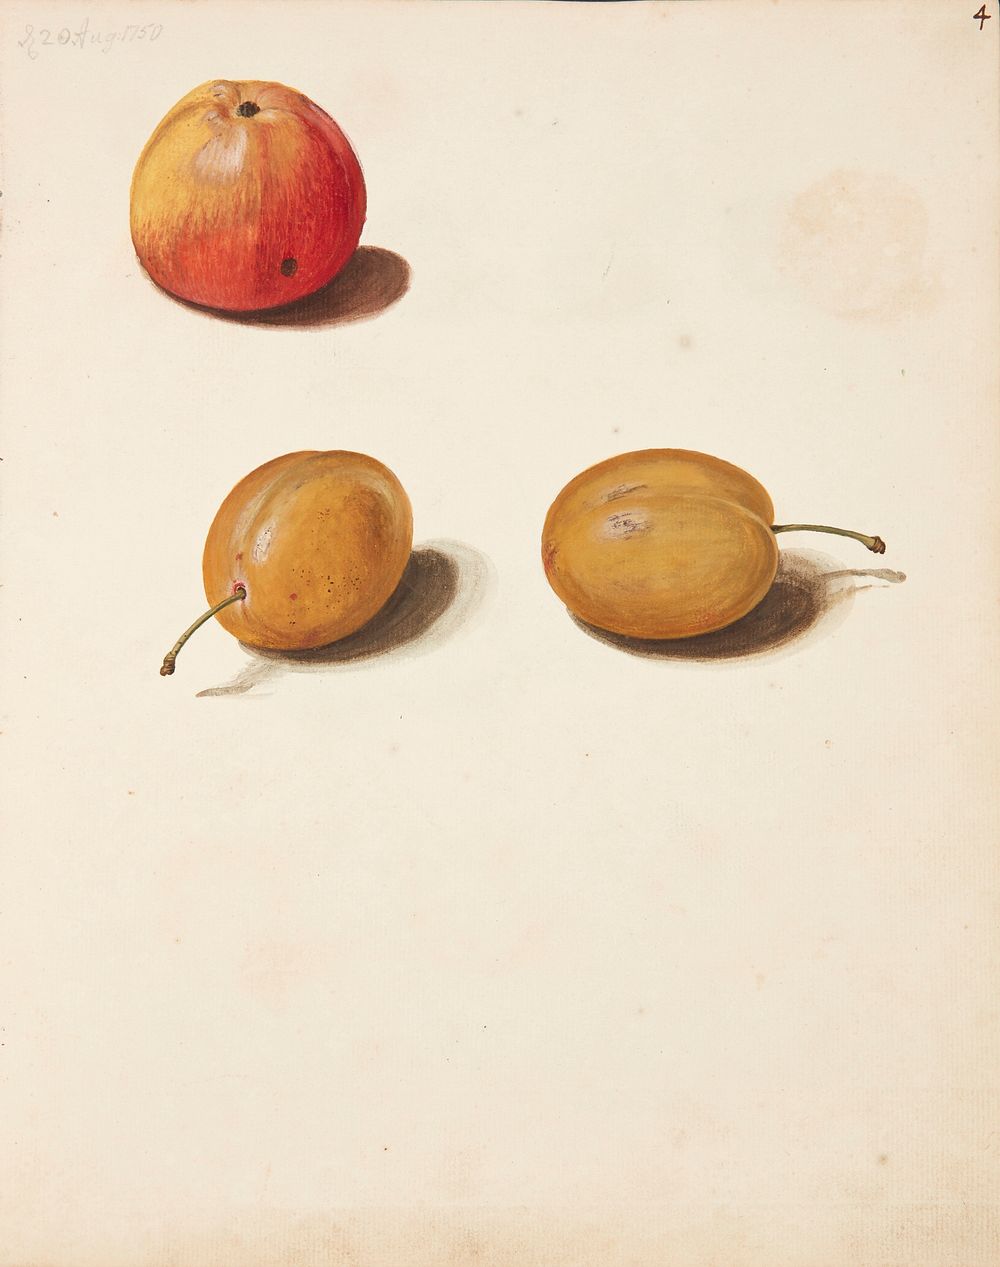 Study of apple and plums by Johanna Fosie